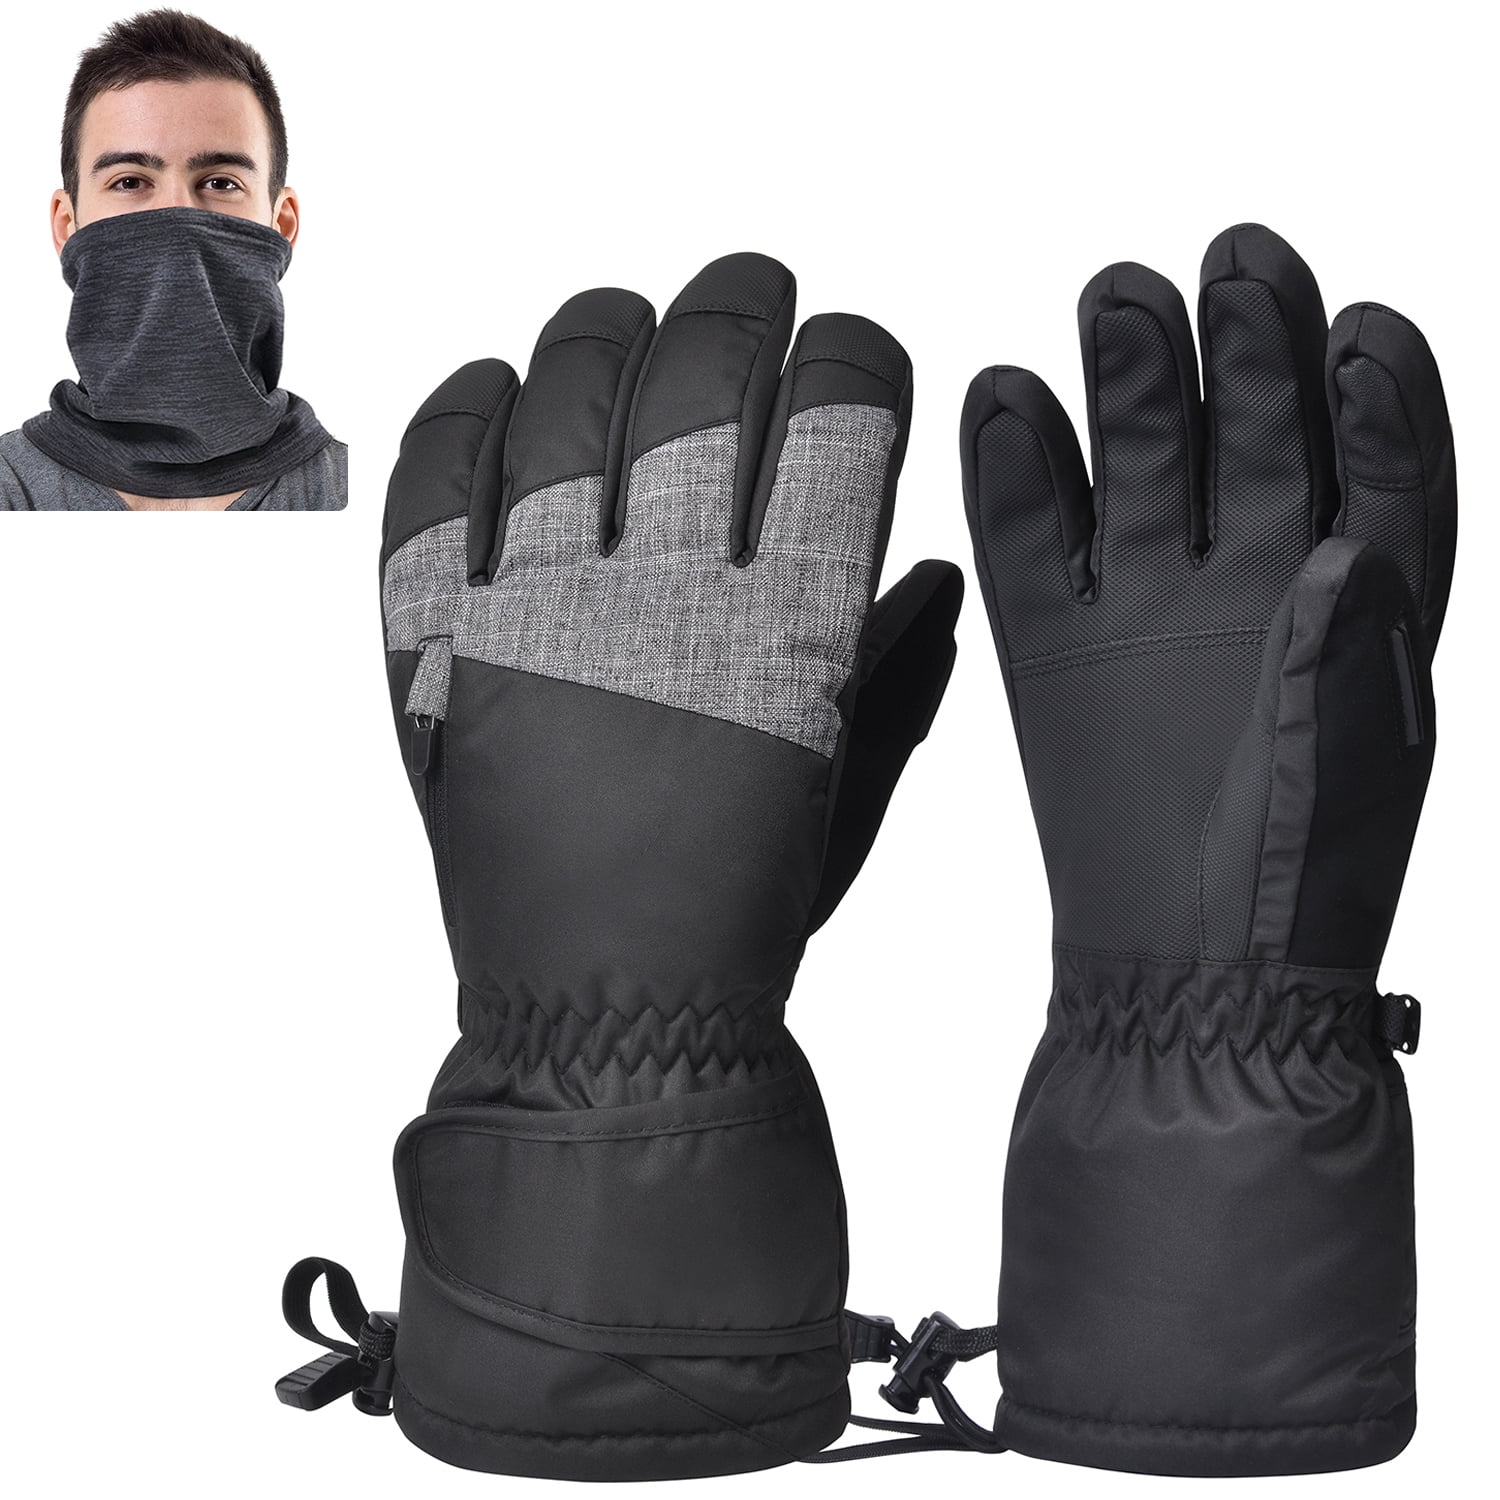 Air Vent Waterproof Ski Snowboard Gloves with 3M Thinsulate,Zipper Pocket Cold Weather Gloves for Men 